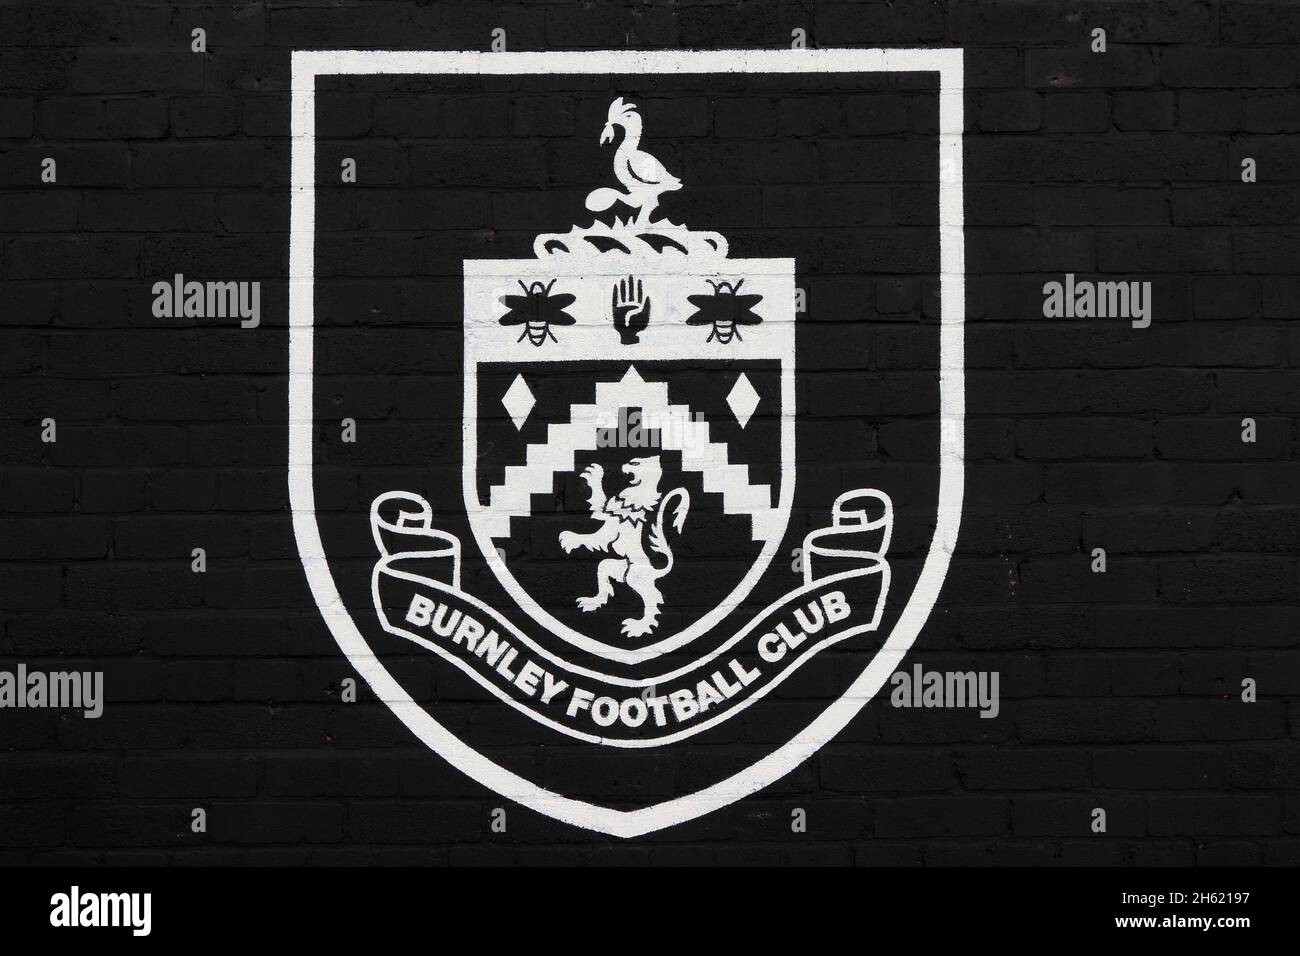 Burnley FC badge painted white on black wall, Burnley Stock Photo